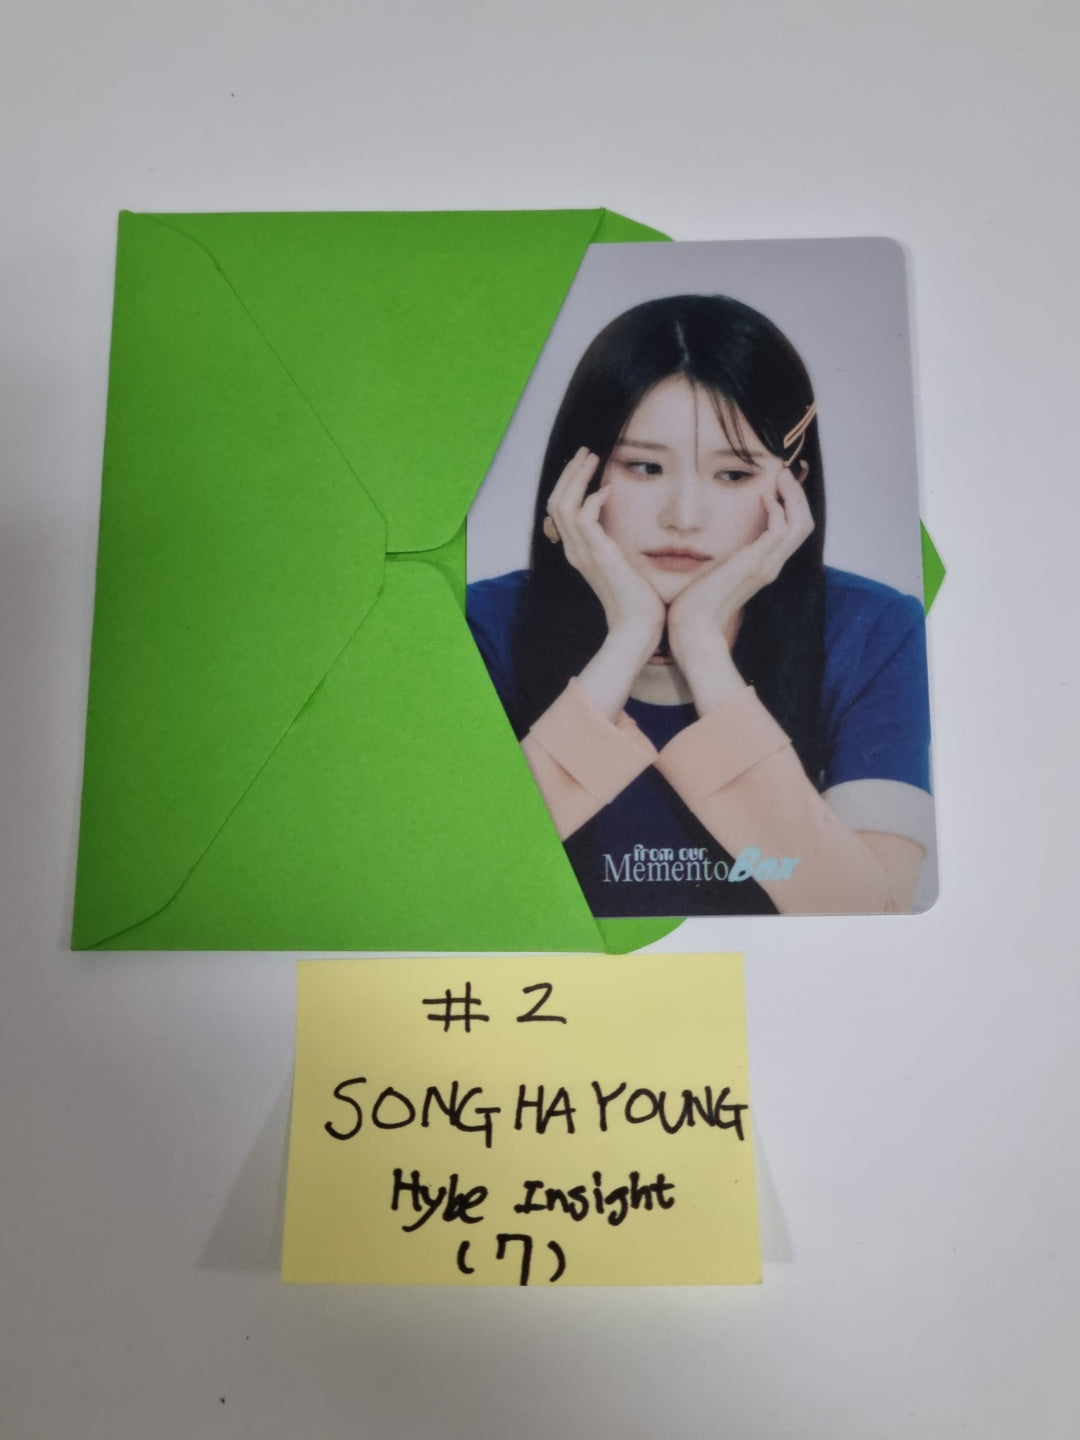 Fromis_9 "from our Memento Box" - Hybe Insight Event PVC Photocard